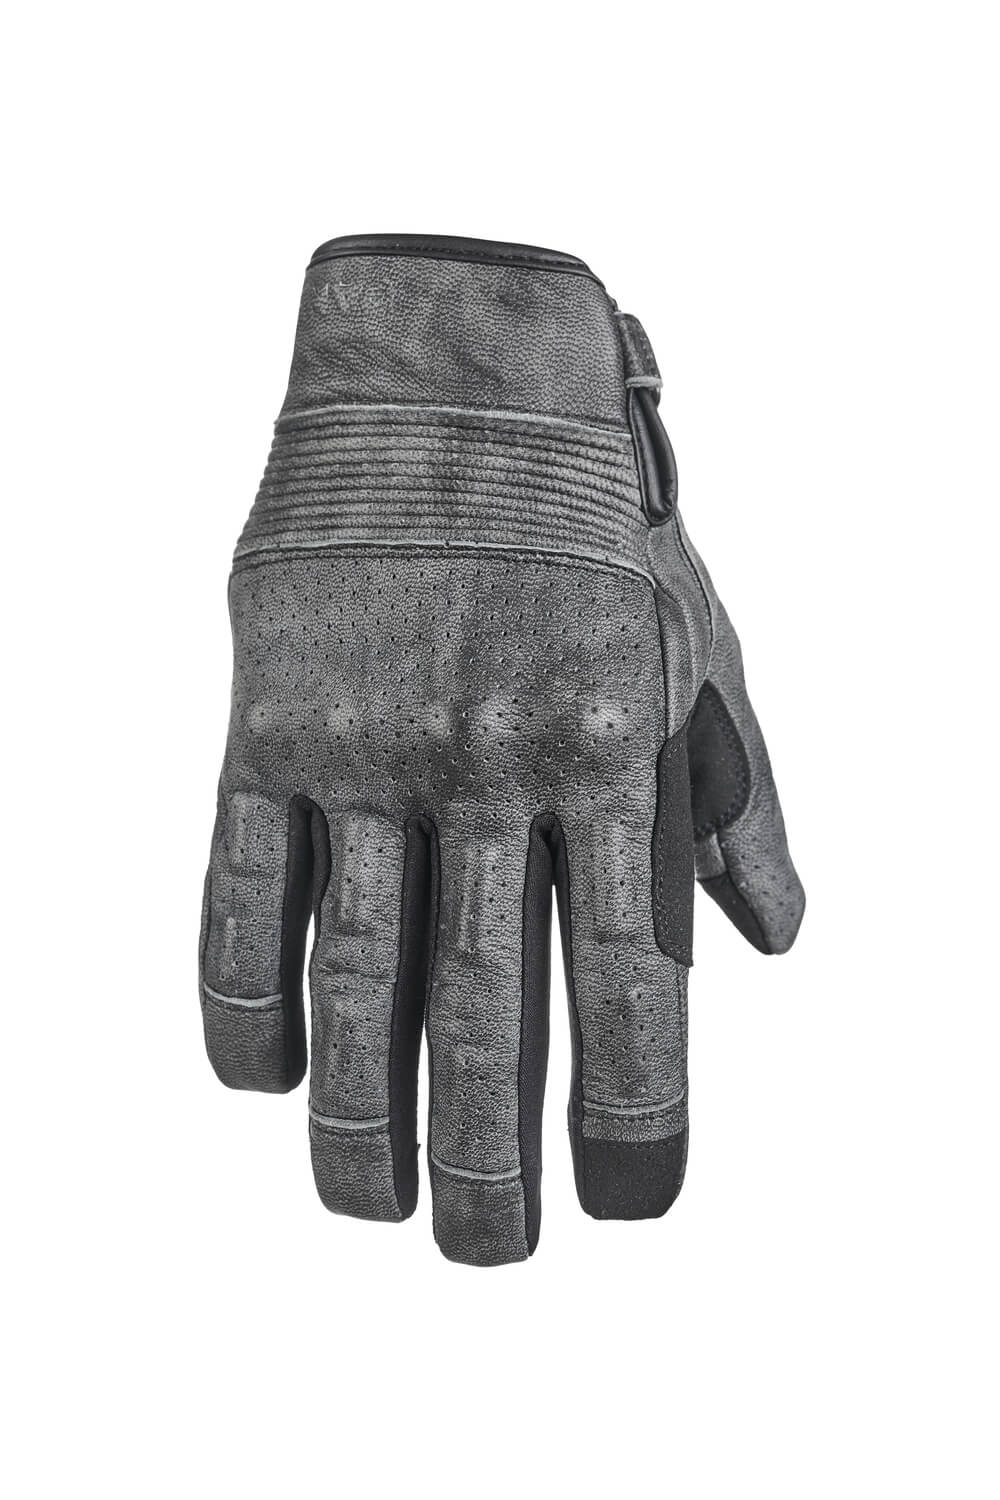 ONYX GREY - Leather Motorcycle Gloves 2